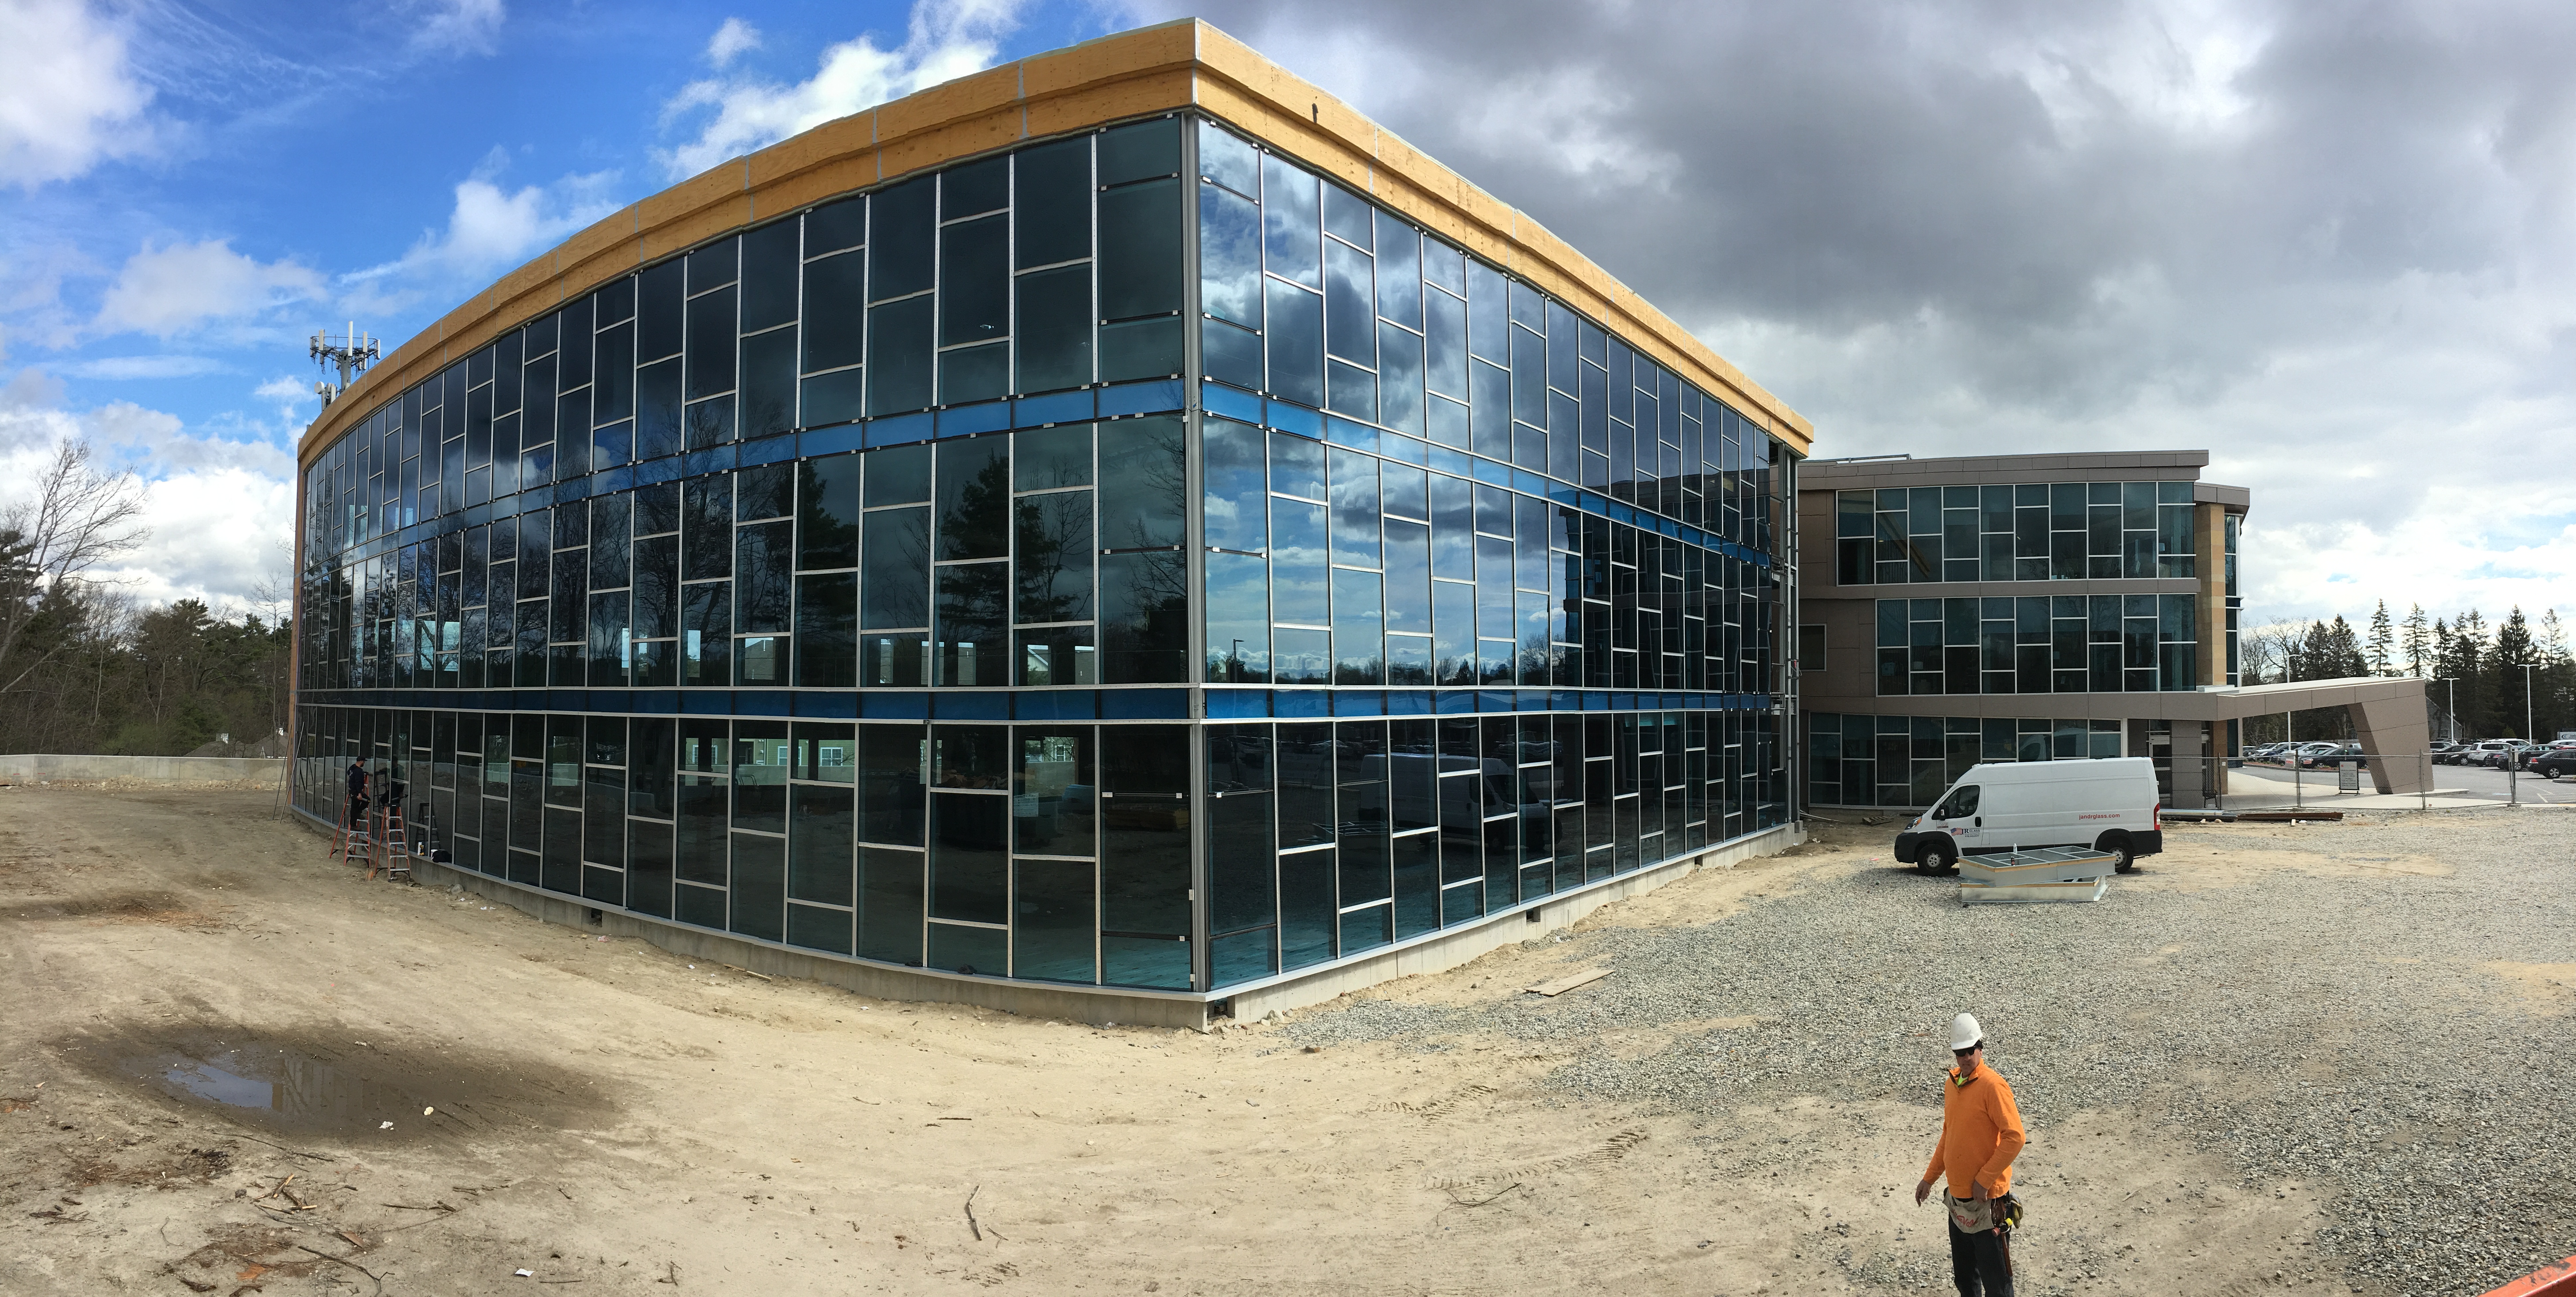 Andover Medical II: Andover Medical II will be complete later this year. The first phase was completed in 2014. Our part is the curtain wall and entrances.